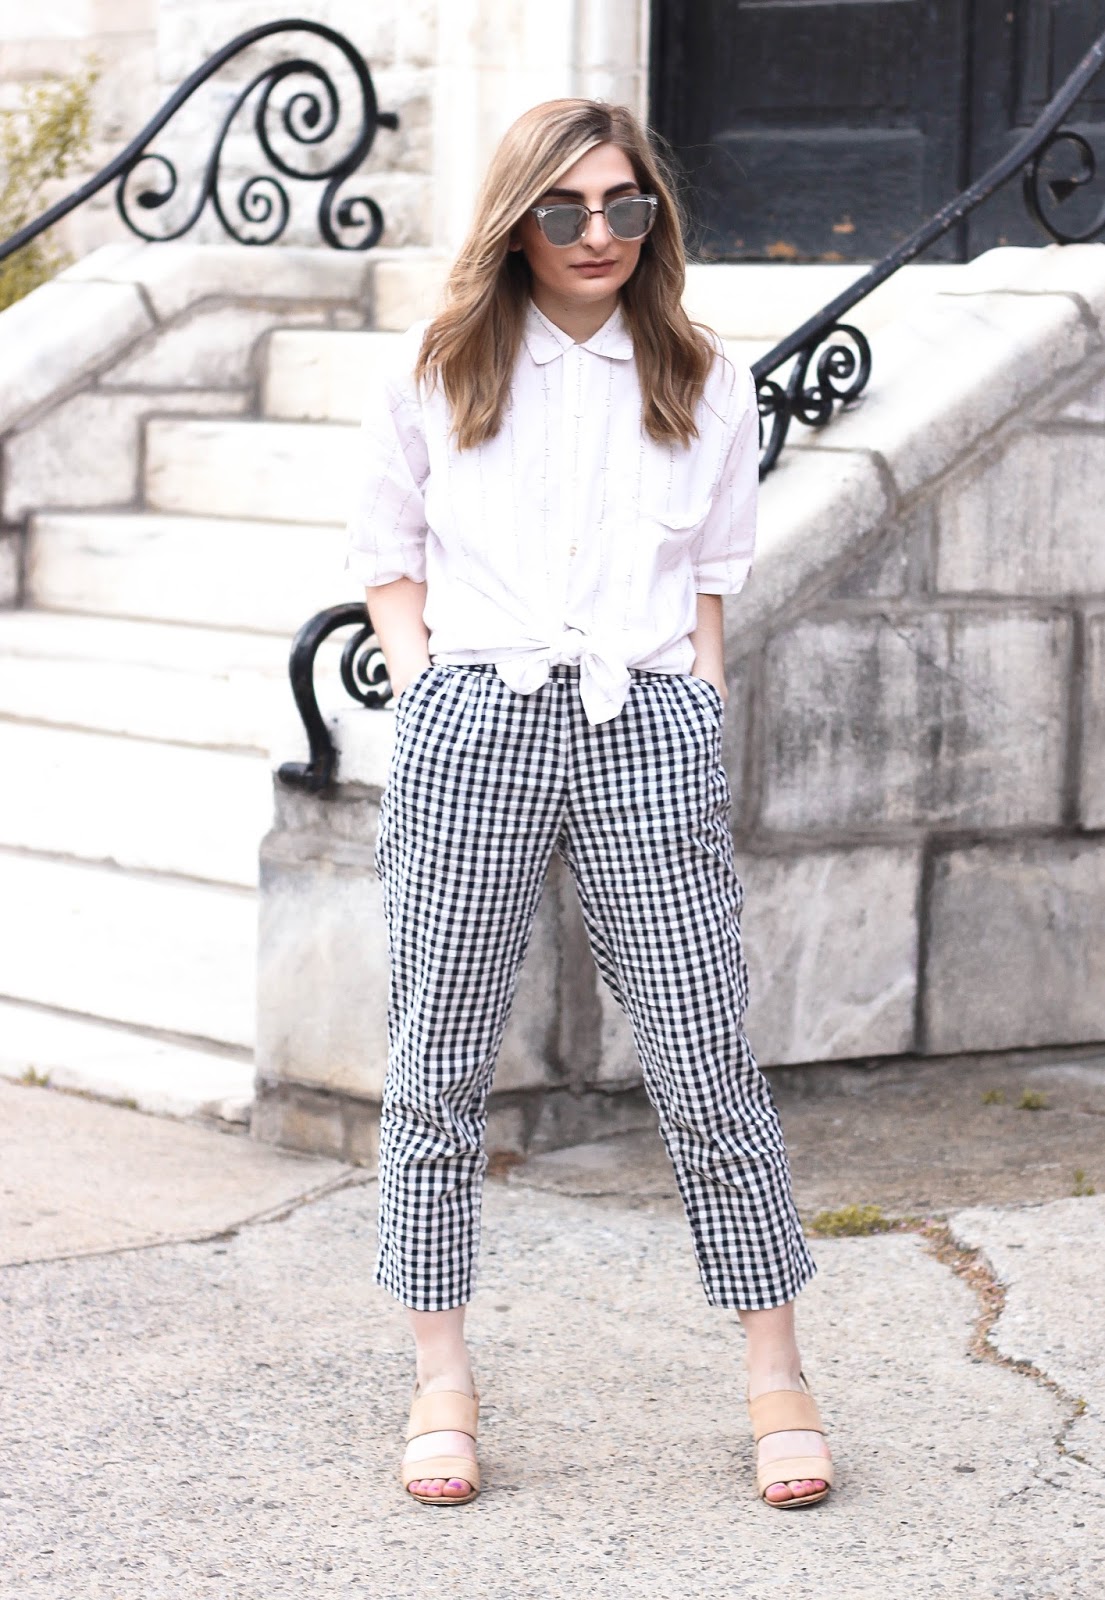 Gingham? I Don't Know Him! — life according to francesca